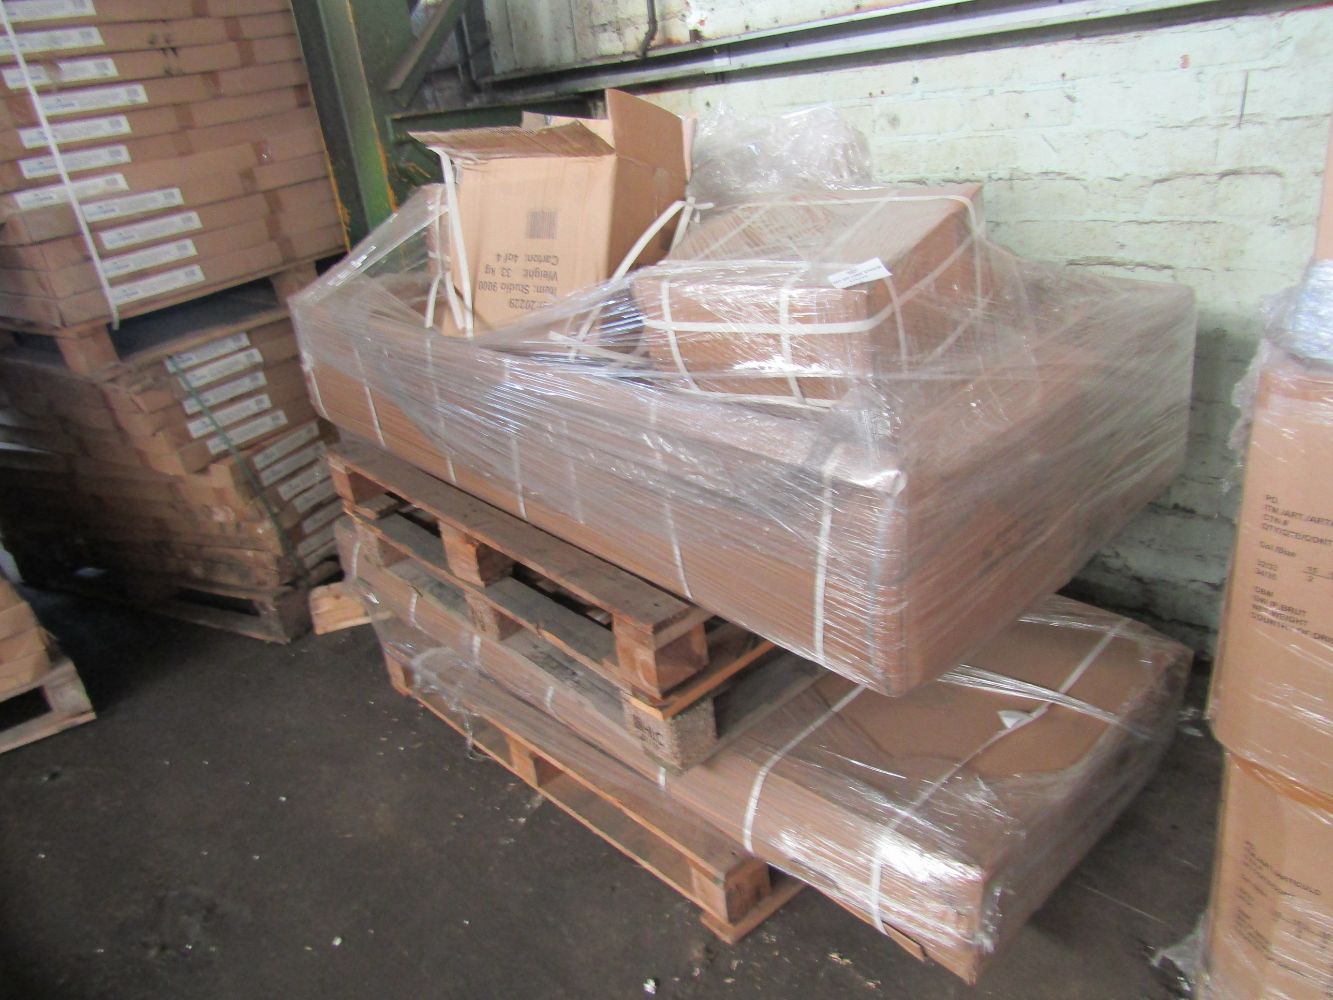 Lots being added Friday, Pallets of Electrical and general Stock returns/end of line goods.